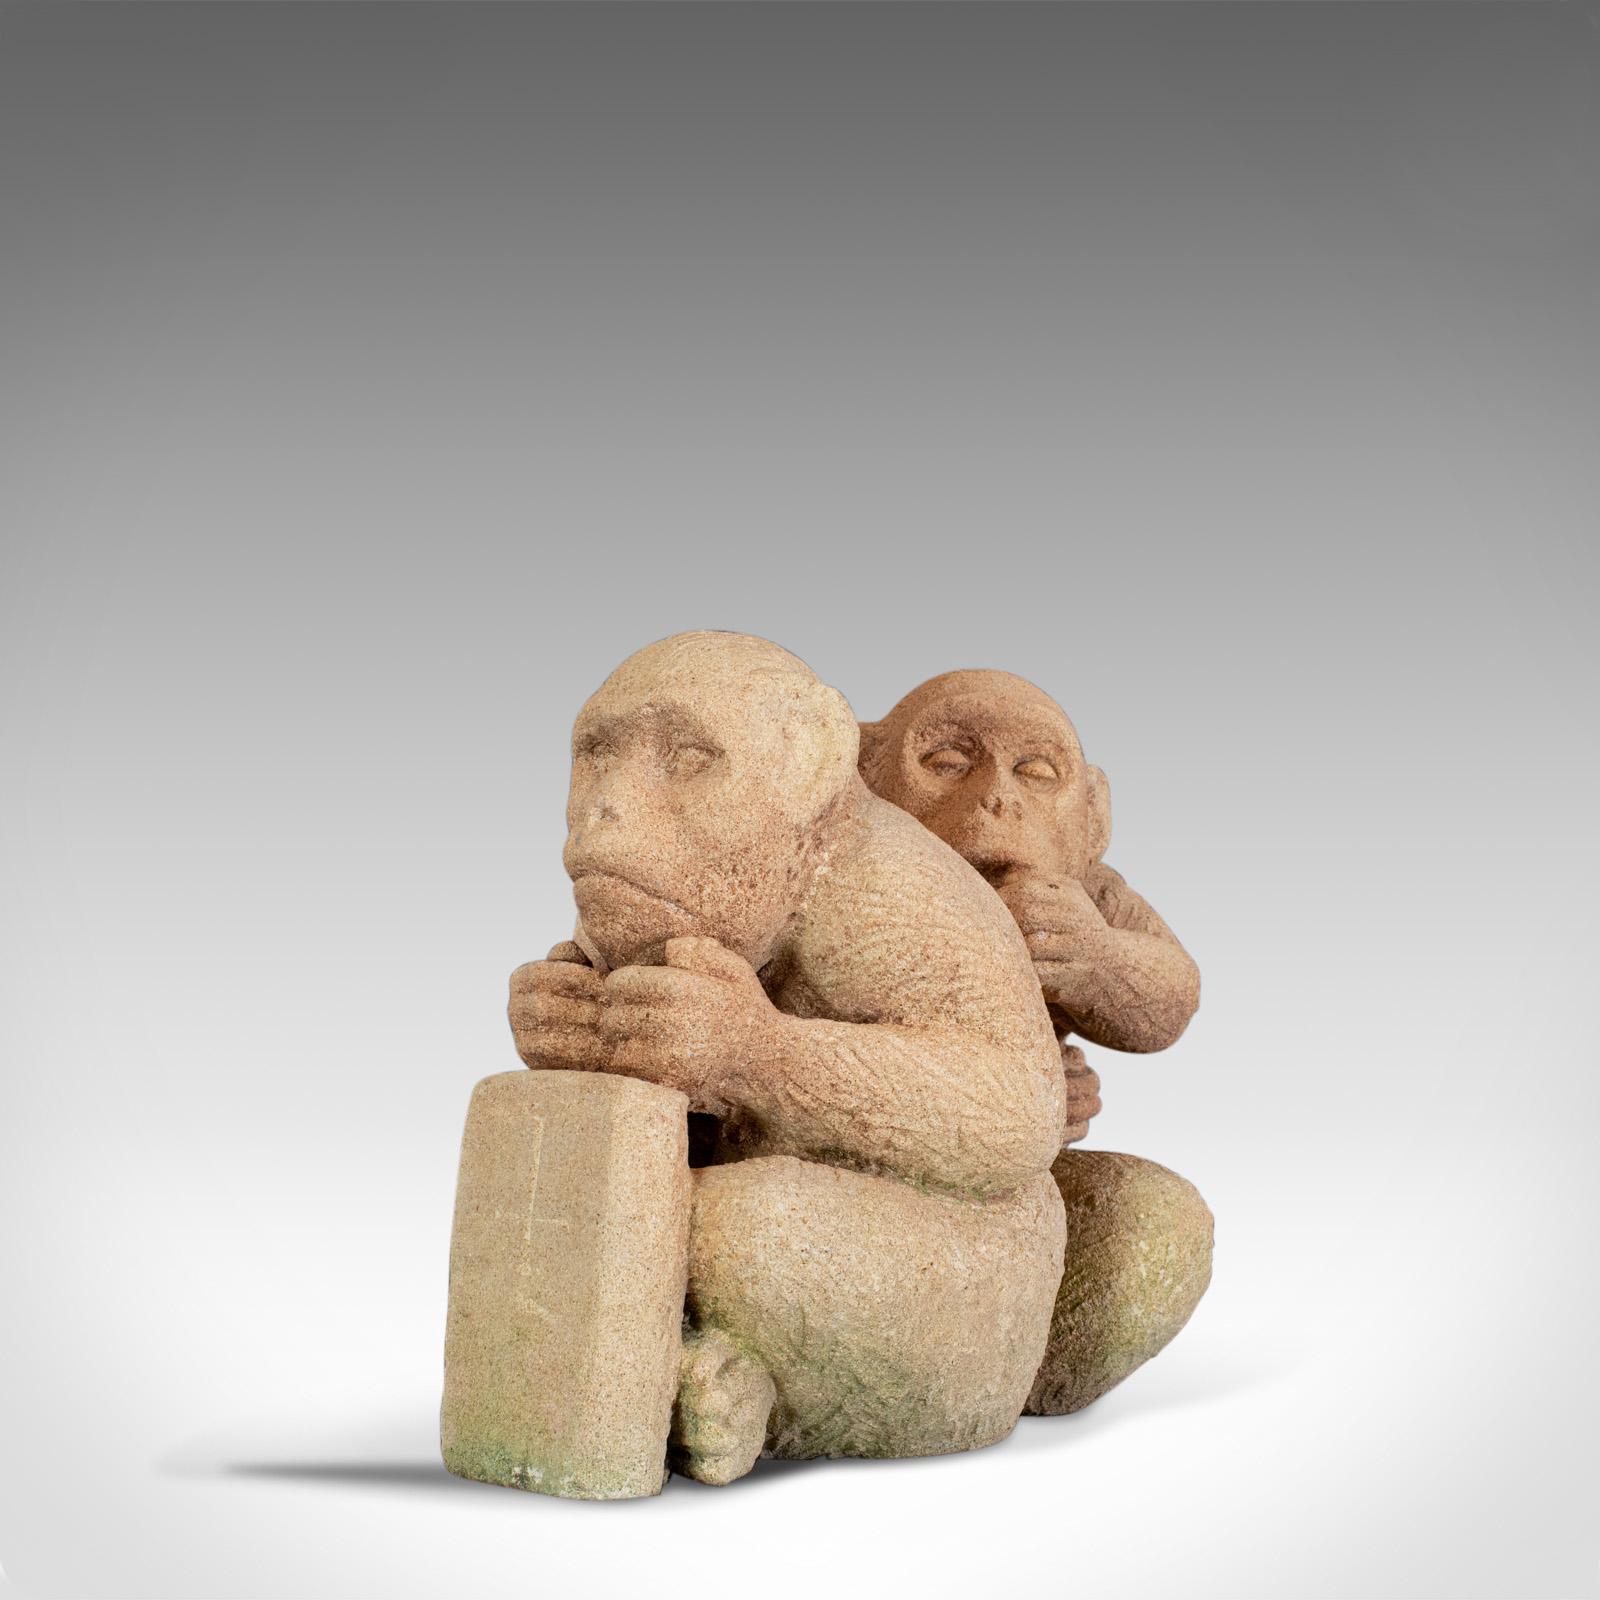 This is a sculpture of a trio of sitting macaques. An English, oolitic Bath stone piece by renowned Devon-based sculptural artist, Dominic Hurley.

Wonderfully carved from single block of Bath stone in the distinctive hue typical of the oolitic